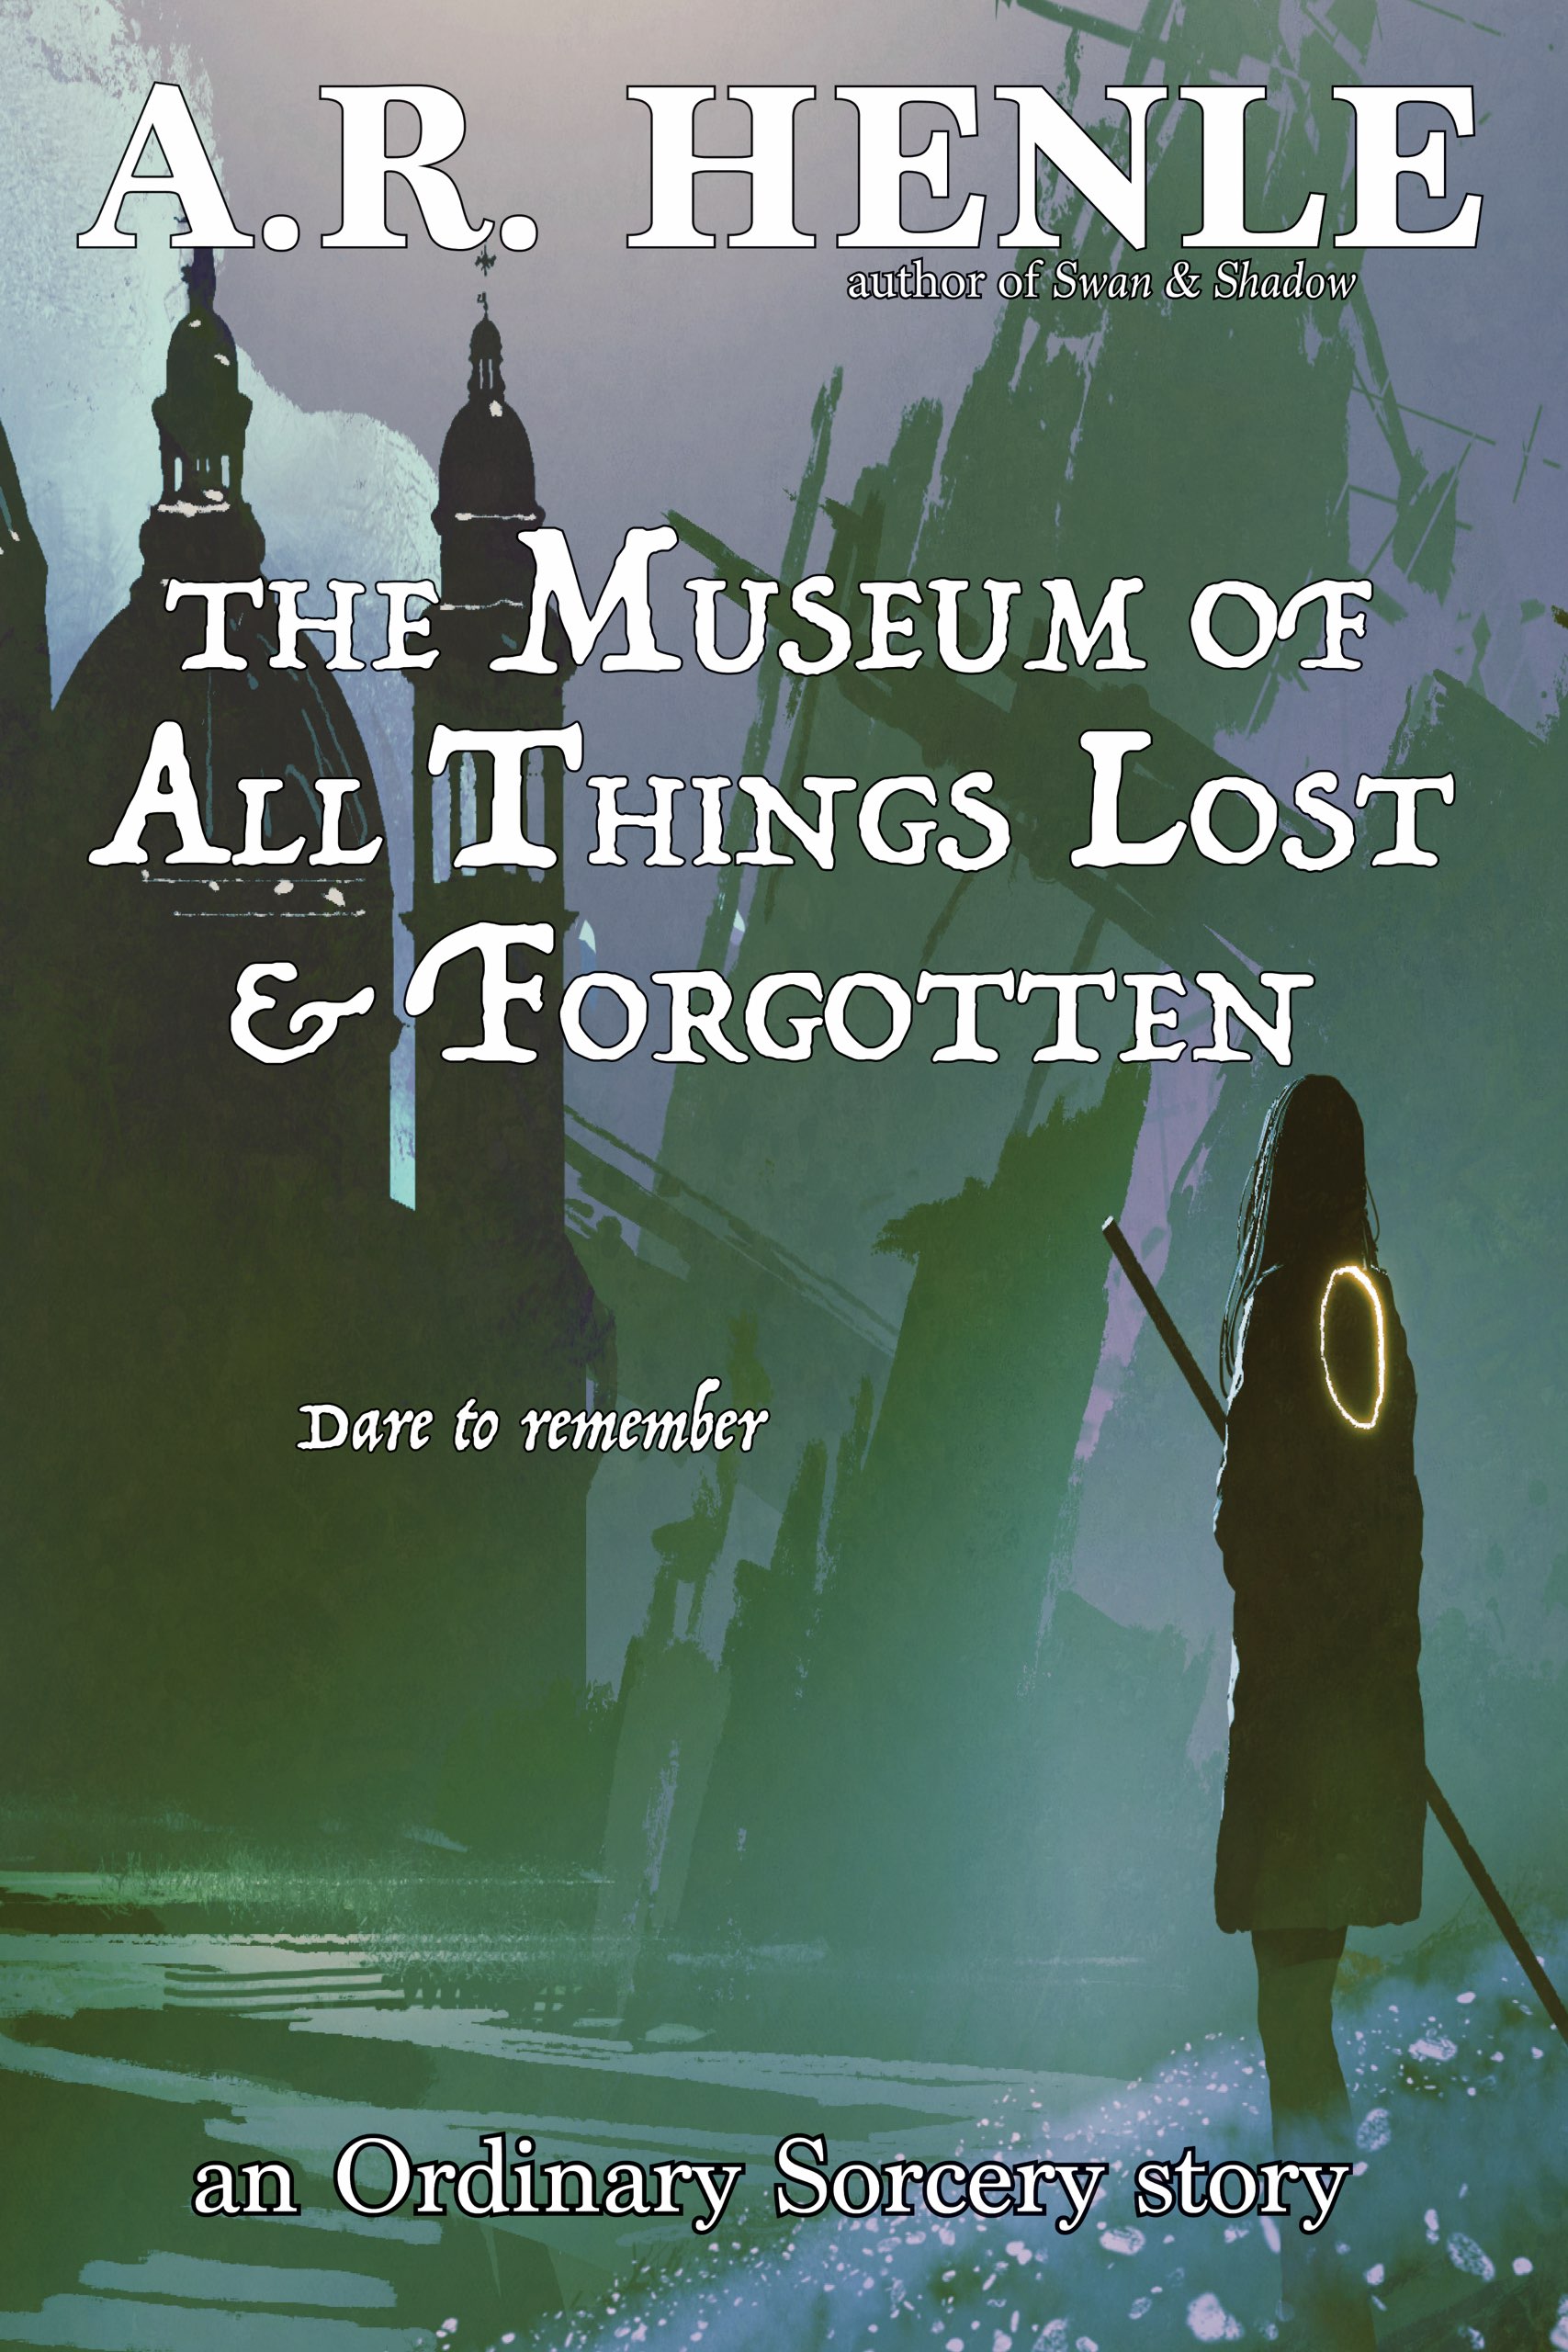 Book cover showing a woman with a staff walking toward immense, neglected buildings and ships. Title: The Museum of All Things Lost & Forgotten. Tagline: "Dare to Remember!"